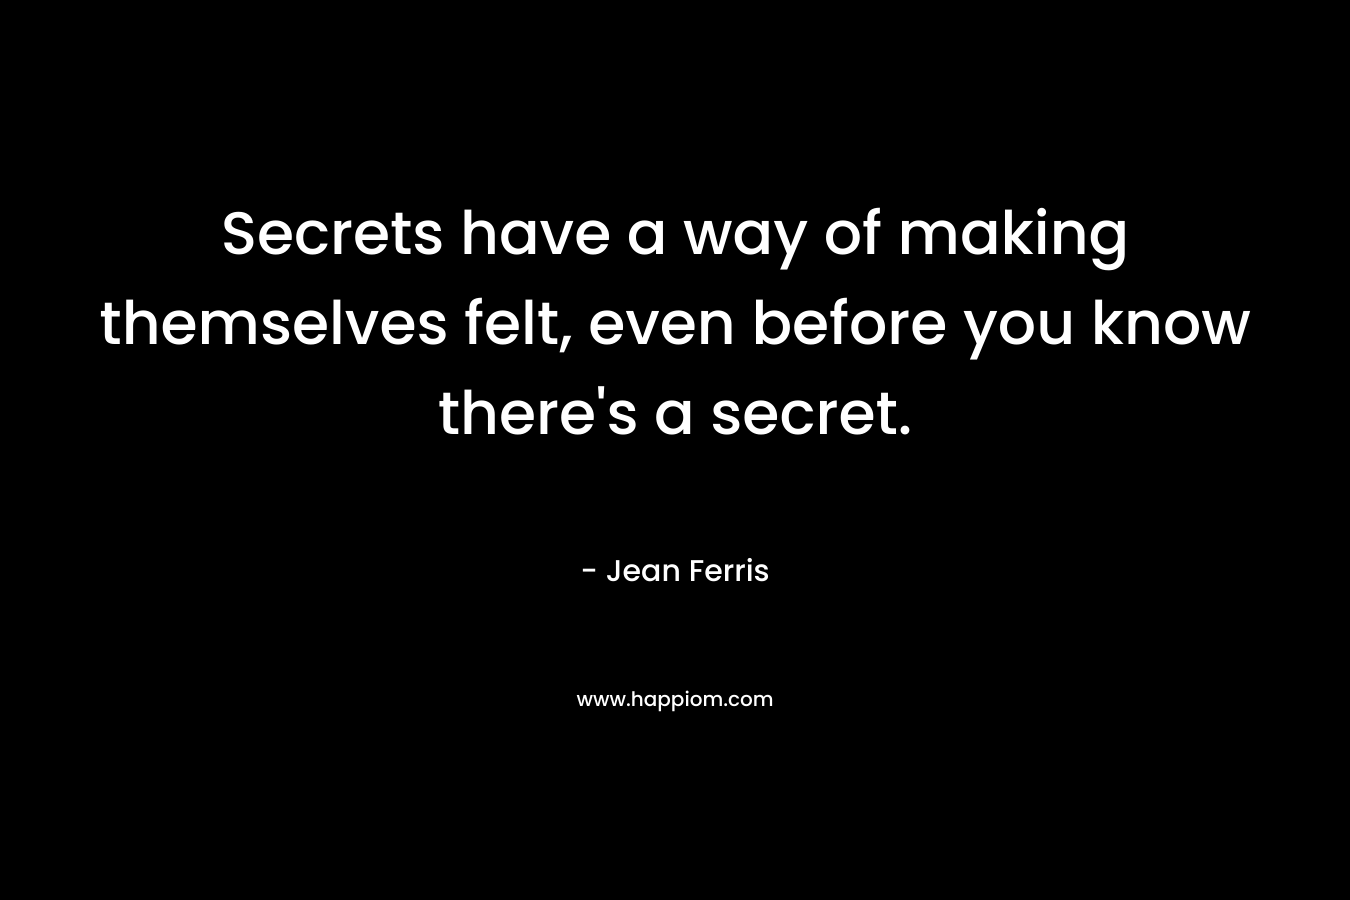 Secrets have a way of making themselves felt, even before you know there's a secret.